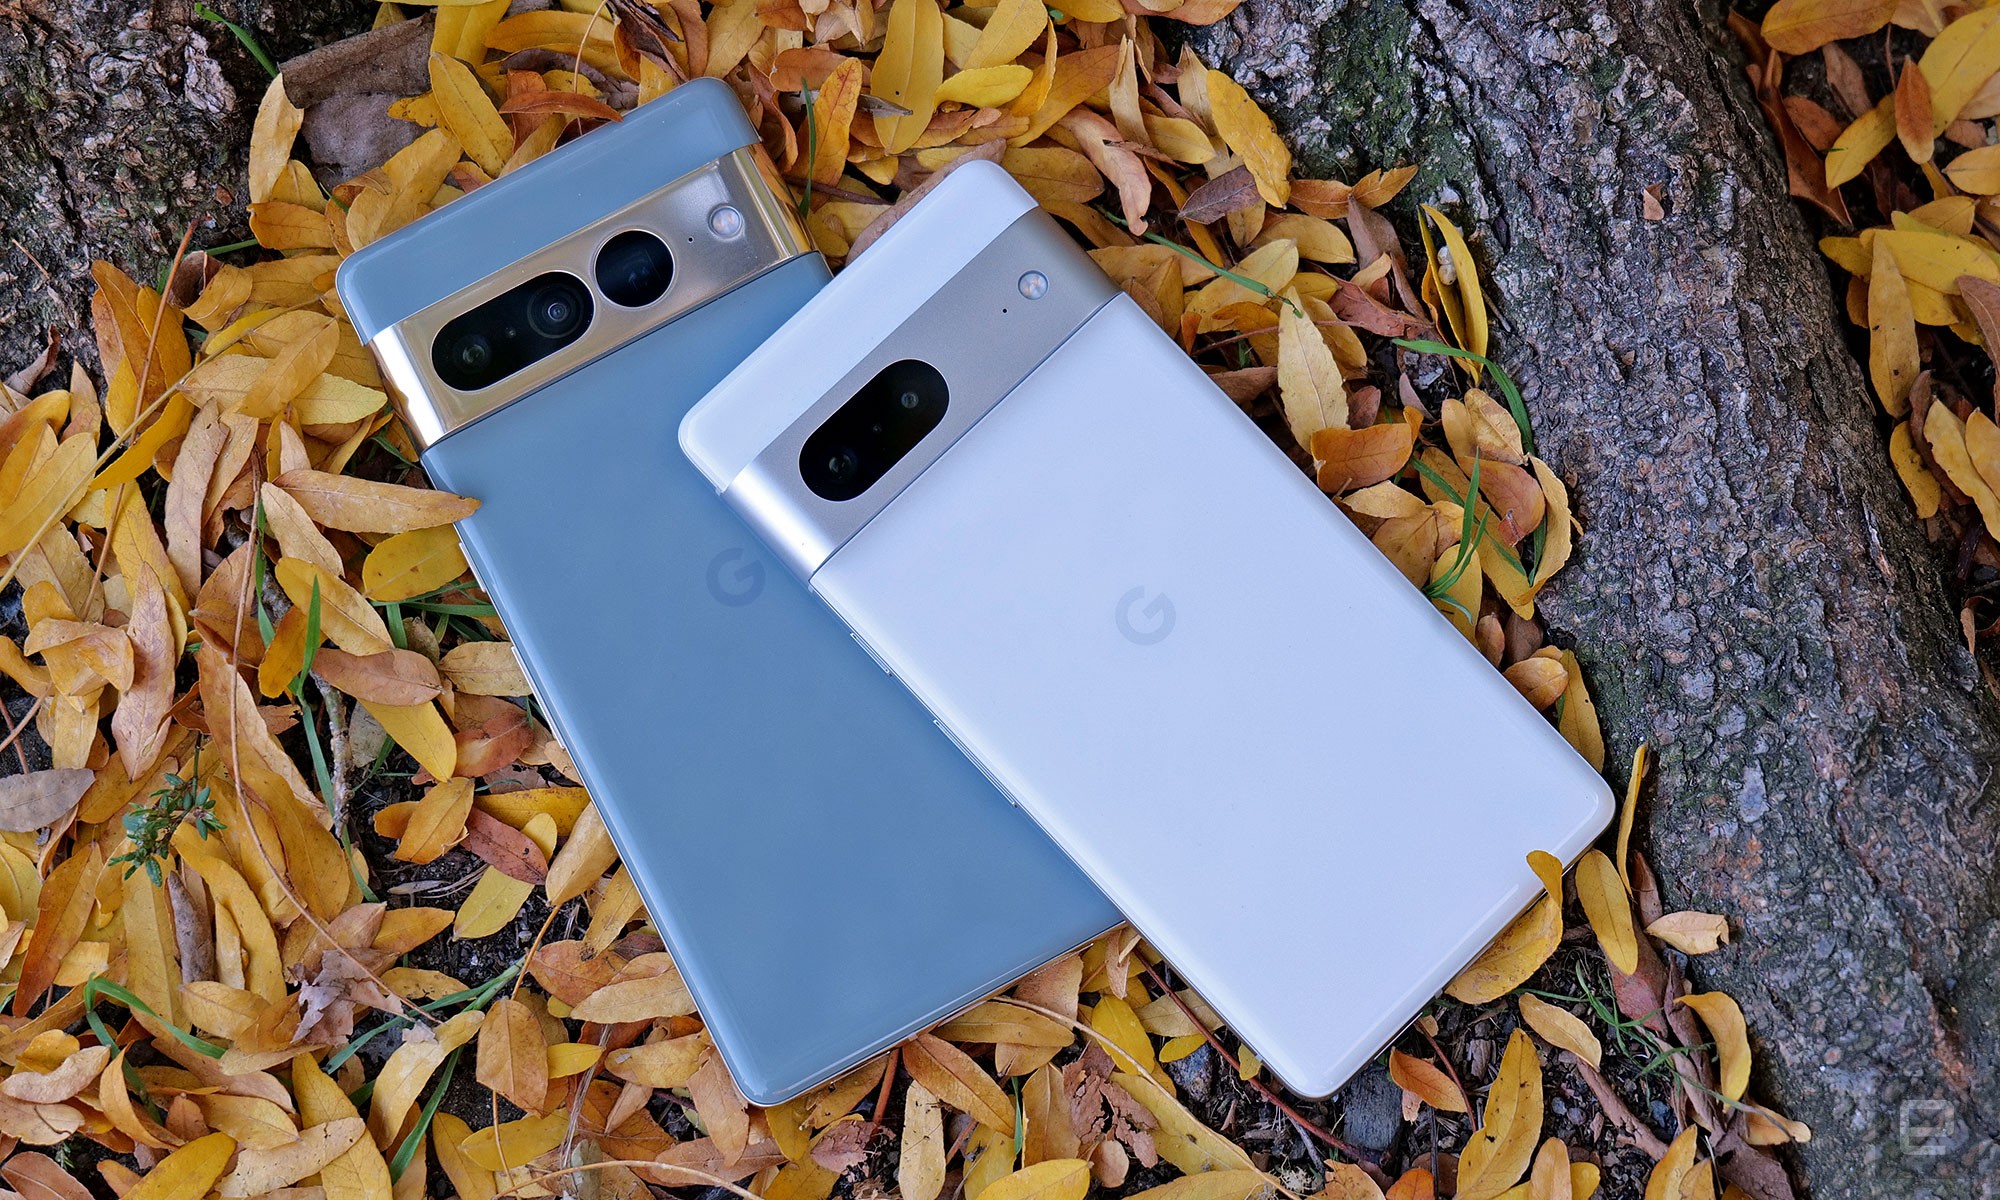 Pixel 7 owners can try Google’s new Clear Calling feature in beta